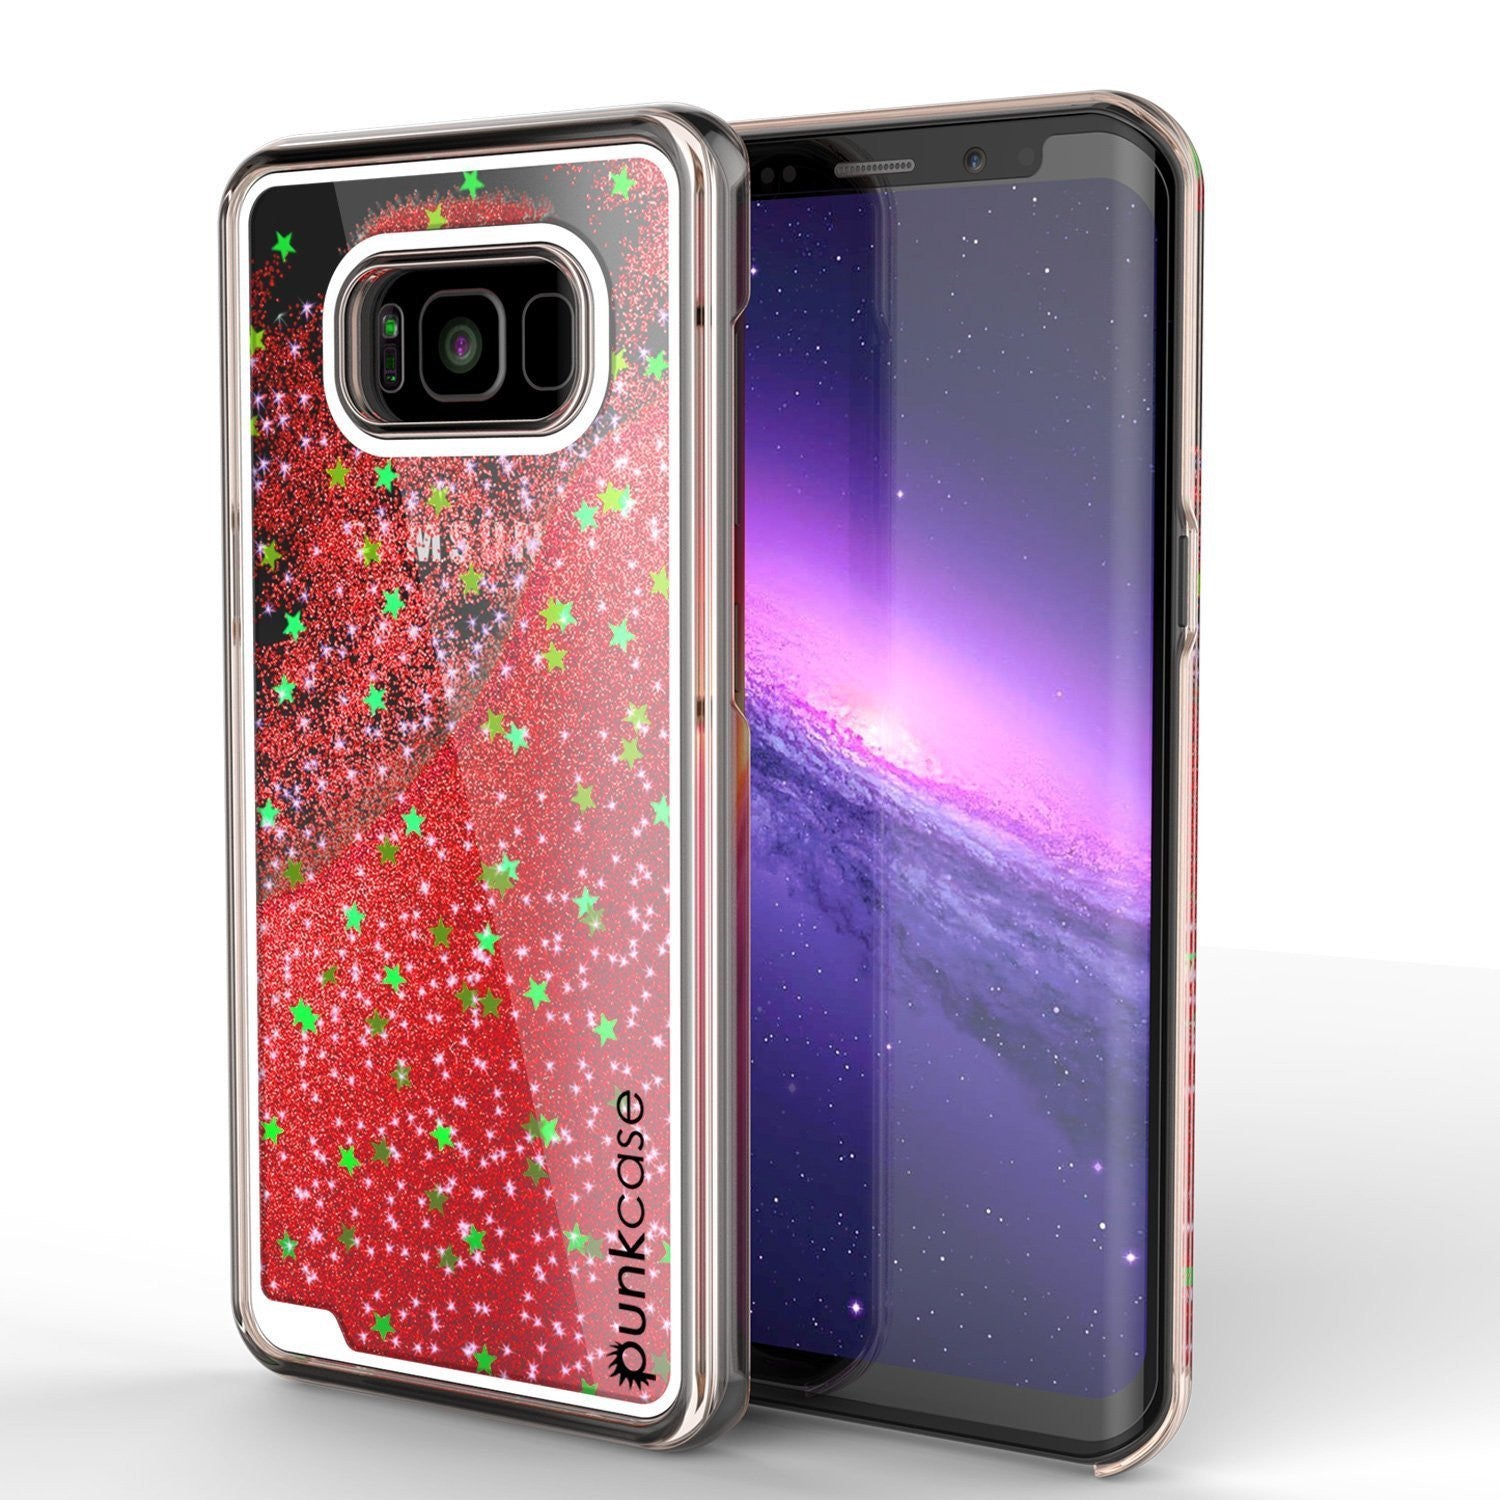 Galaxy S8 Plus Case, Punkcase [Liquid Series] Protective Dual Layer Floating Glitter Cover + PunkShield Screen Protector for Samsung S8 [Red] (Color in image: Red)